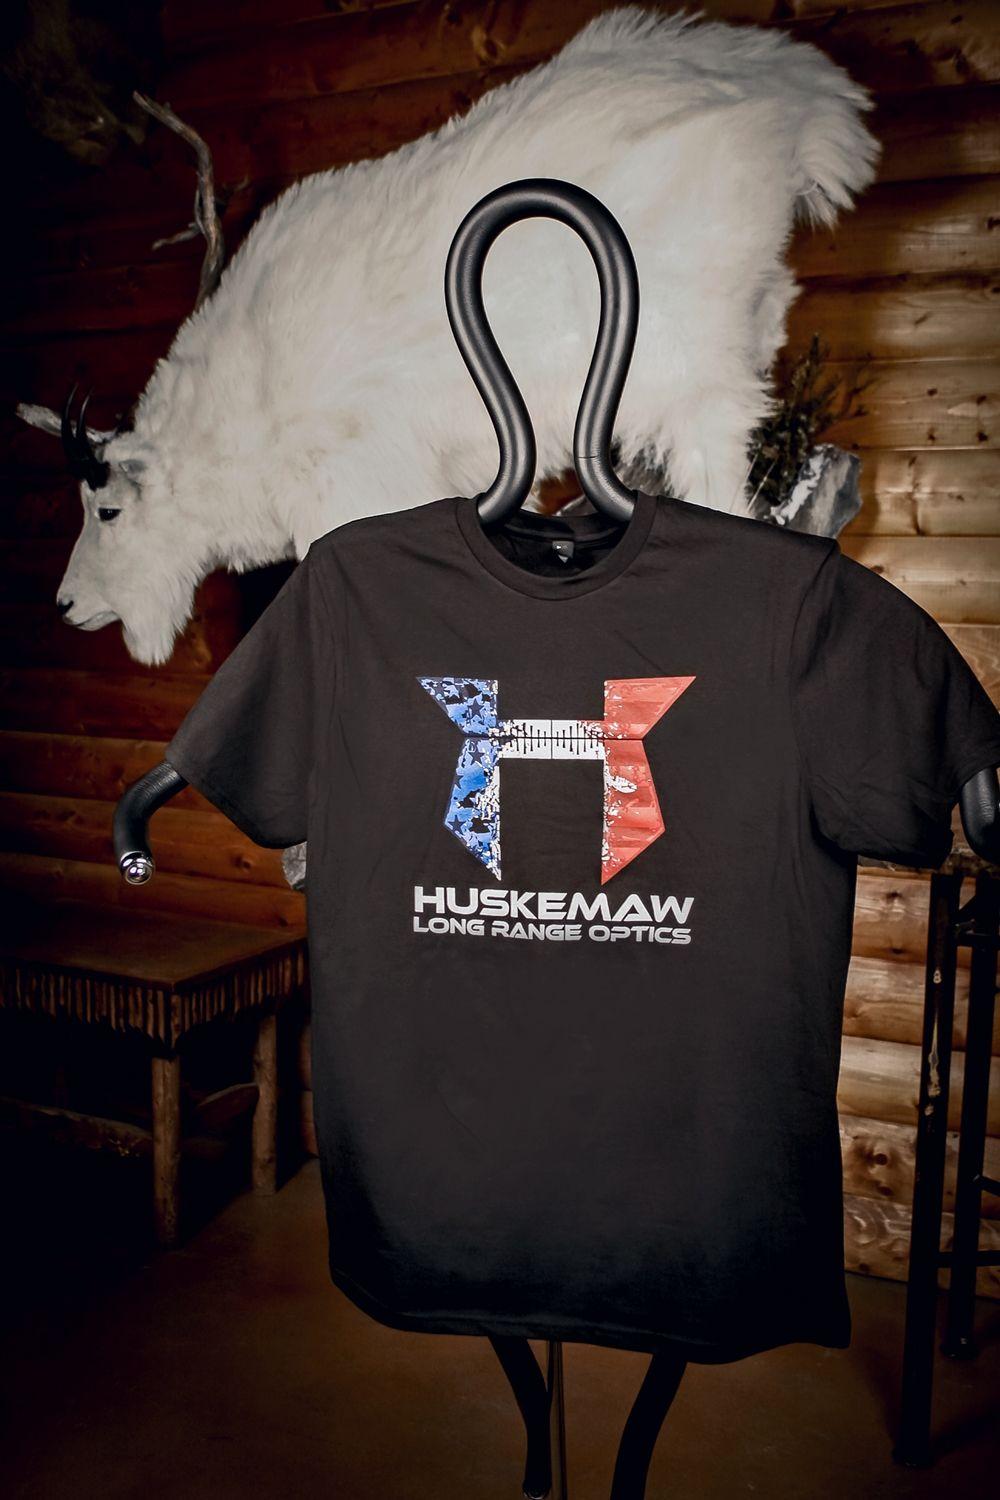 White with Red V Logo - Huskemaw T-shirt with Red, White, Blue Logo